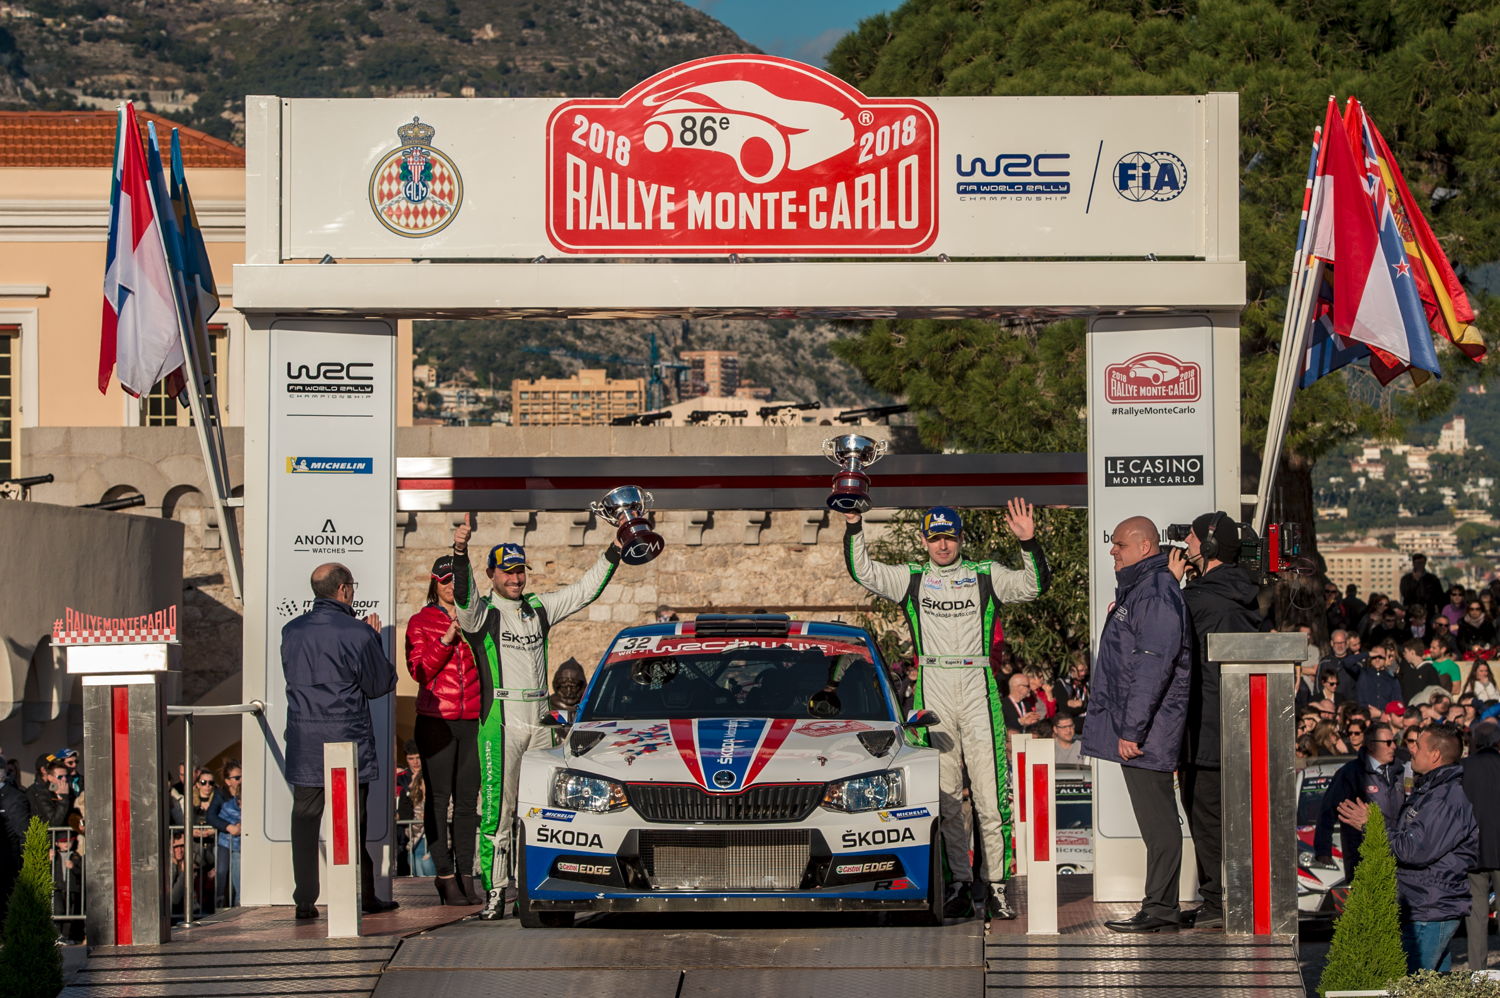 Time to celebrate: Jan Kopecký /Pavel Dresler (ŠKODA FABIA R5) won WRC 2 category and RC 2 class at the opening round of the FIA World Rally Championship 2018, the Rally Monte-Carlo